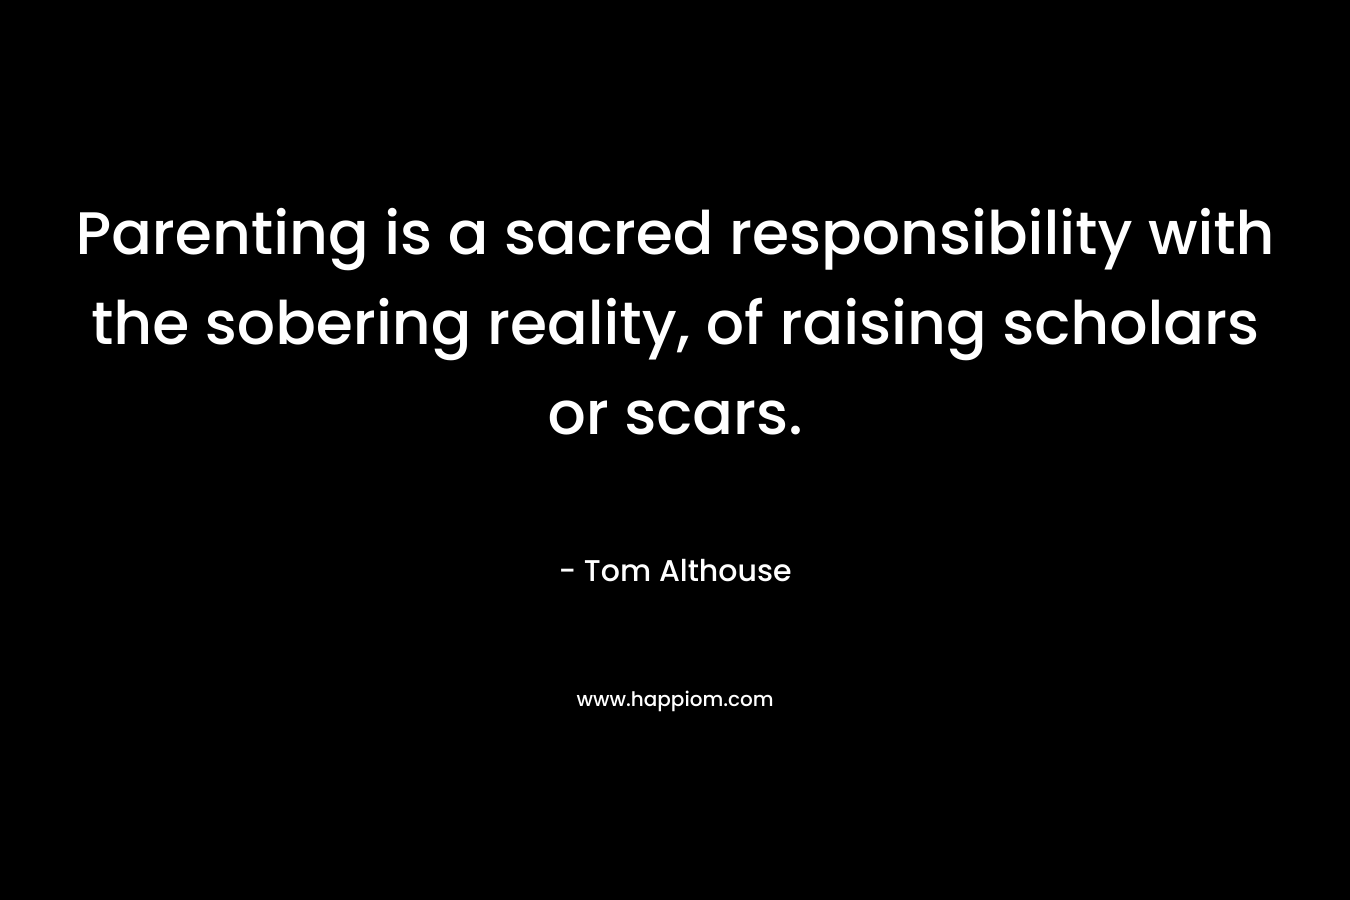 Parenting is a sacred responsibility with the sobering reality, of raising scholars or scars. – Tom Althouse